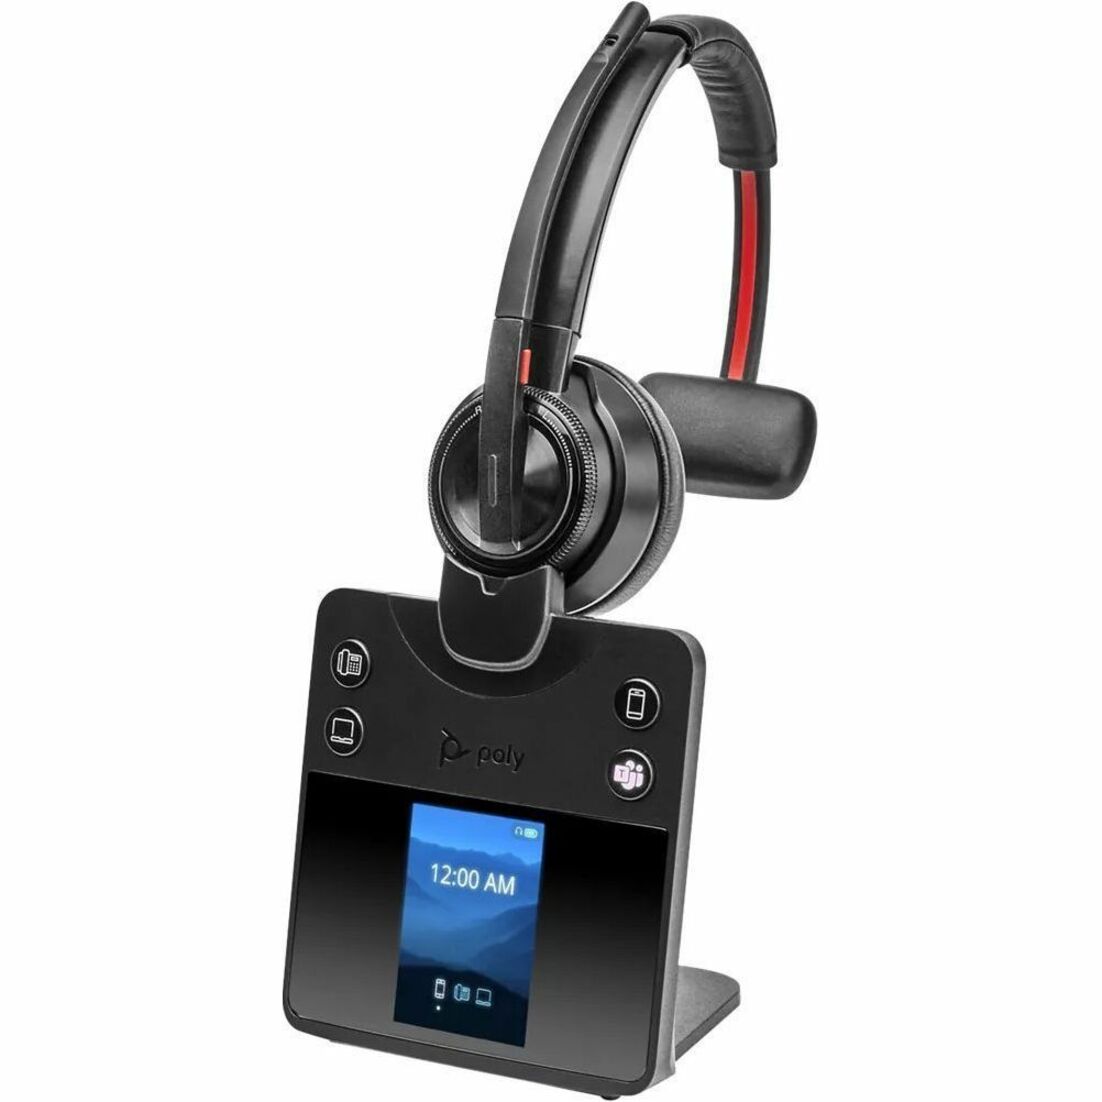 Plantronics 2-221102-201 Savi 8400 Office 8410 Headset, Mono Wireless Bluetooth/DECT 6.0 Headset with Noise Cancelling Boom Microphone, Wideband Audio, and Microsoft Teams Certification